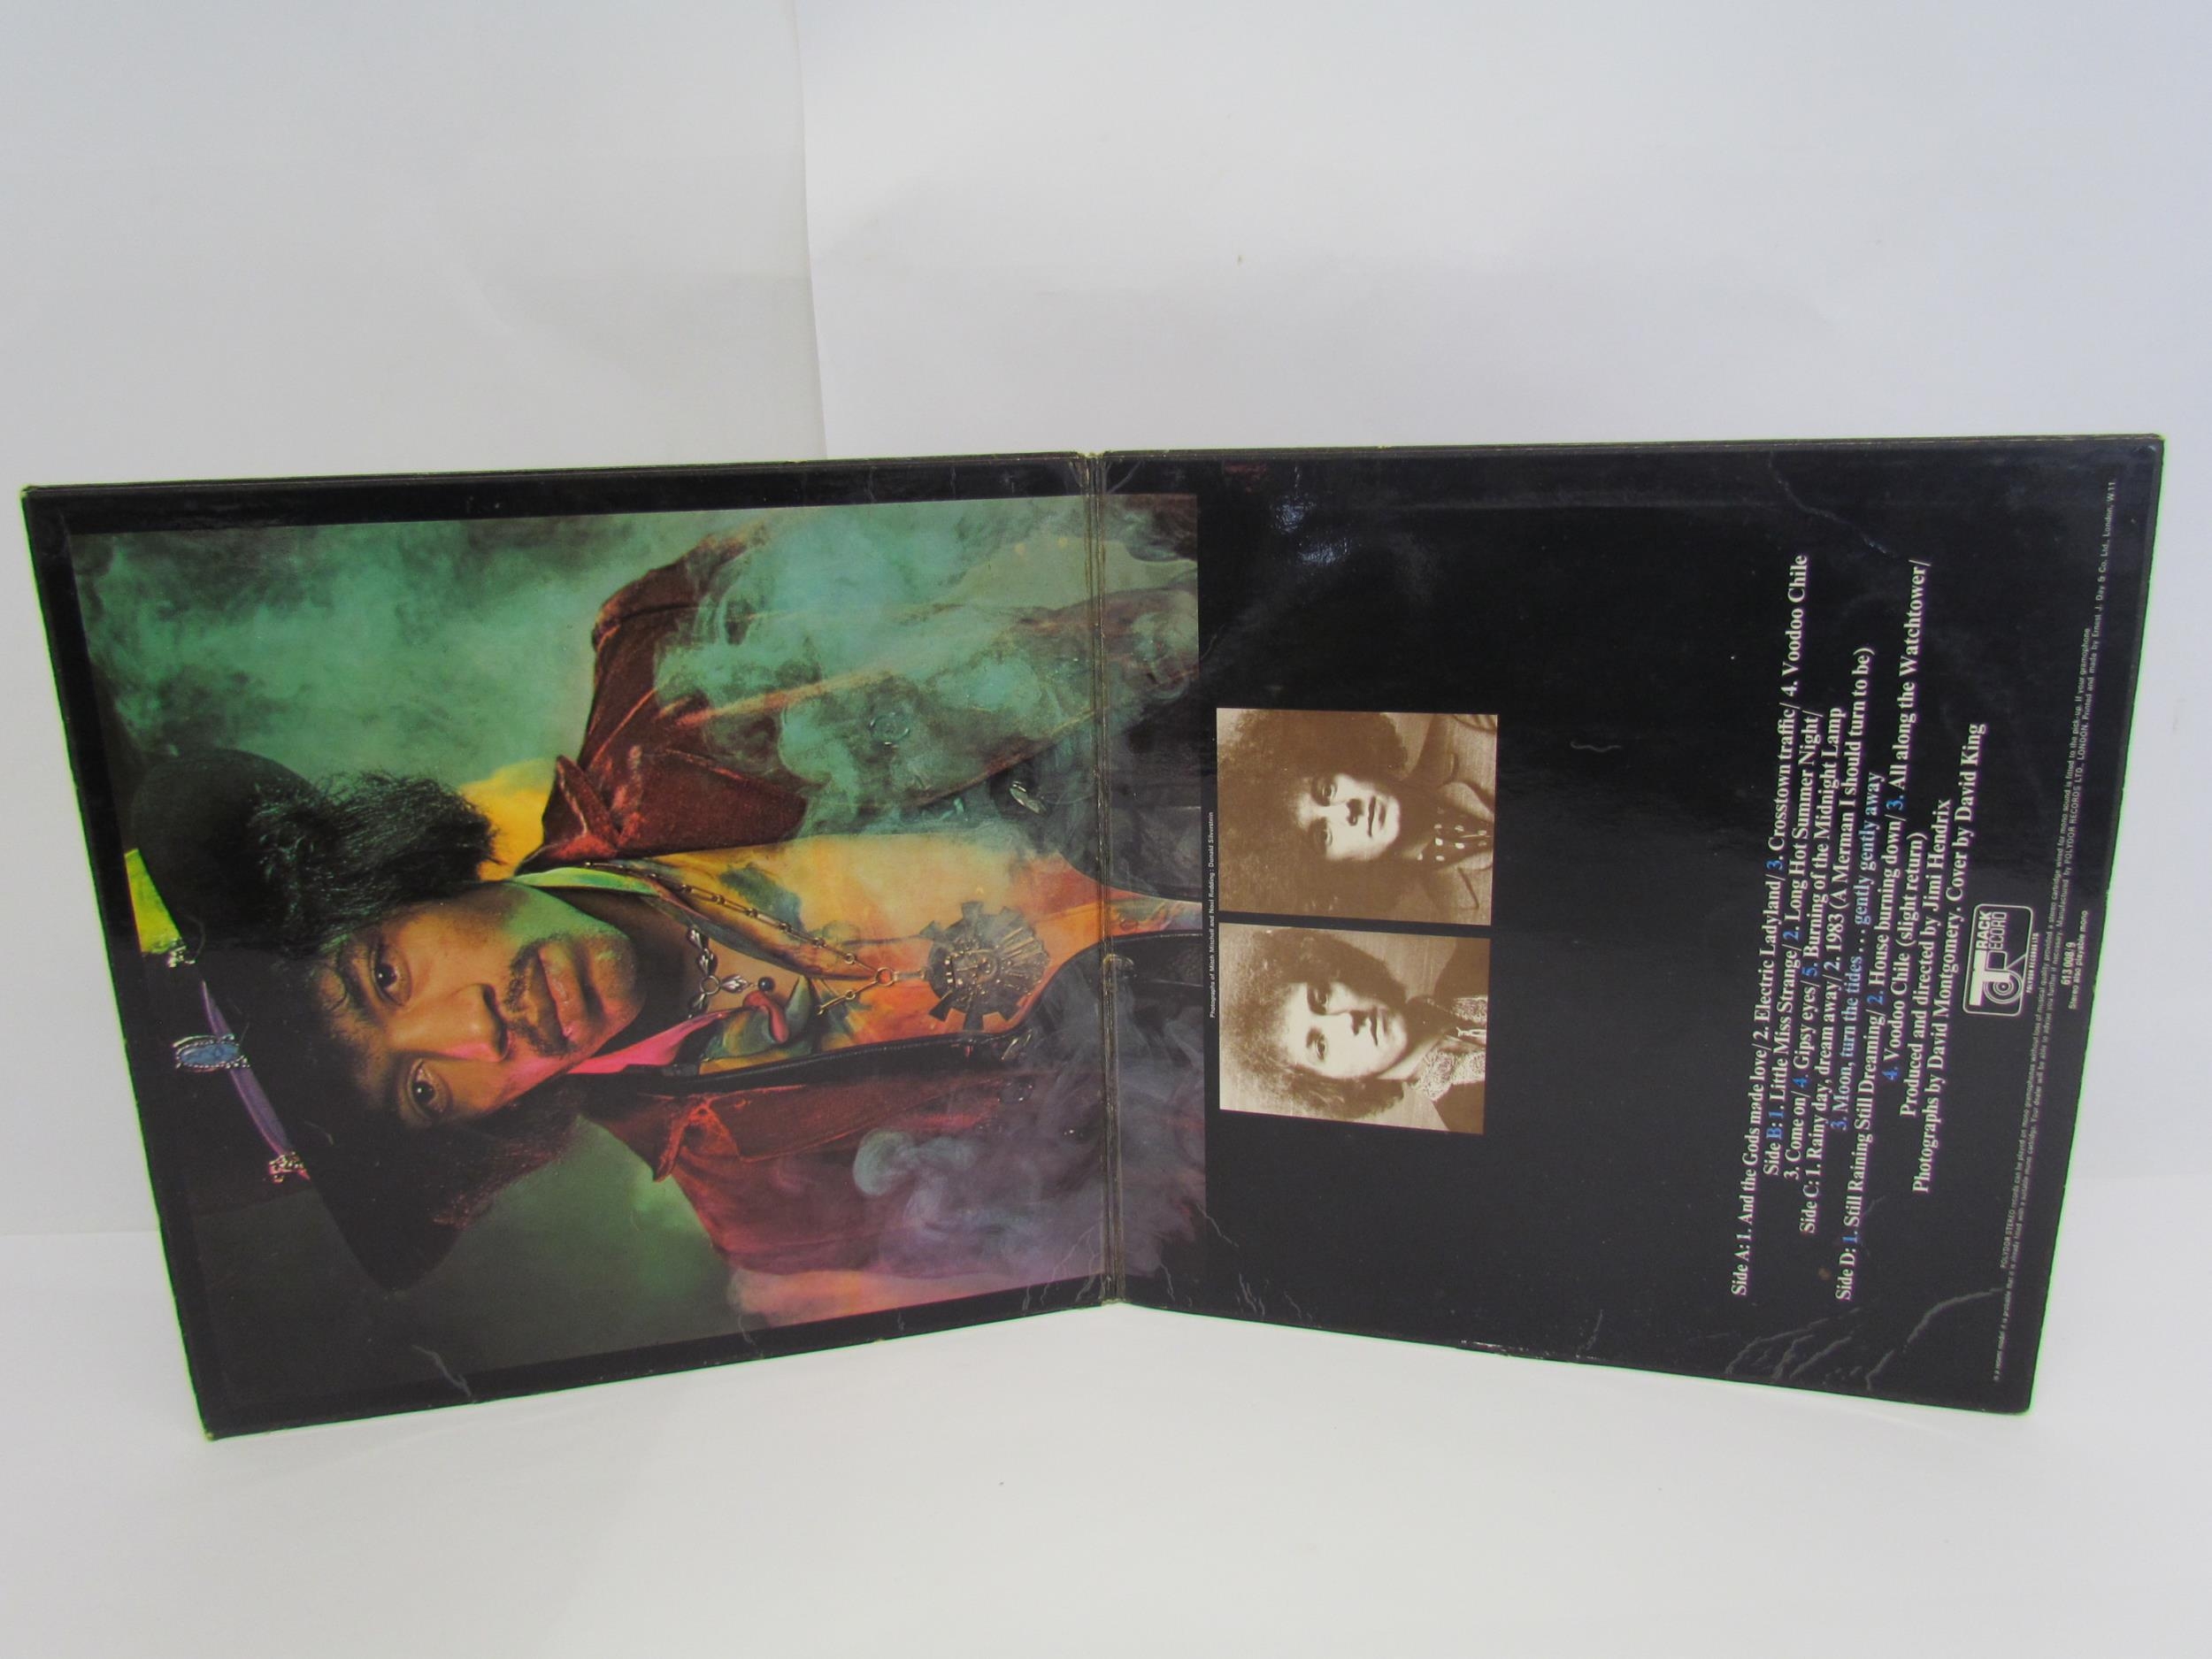 THE JIMI HENDRIX EXPERIENCE: 'Electric Ladyland' double LP, original UK pressing on Track Record, - Image 3 of 9